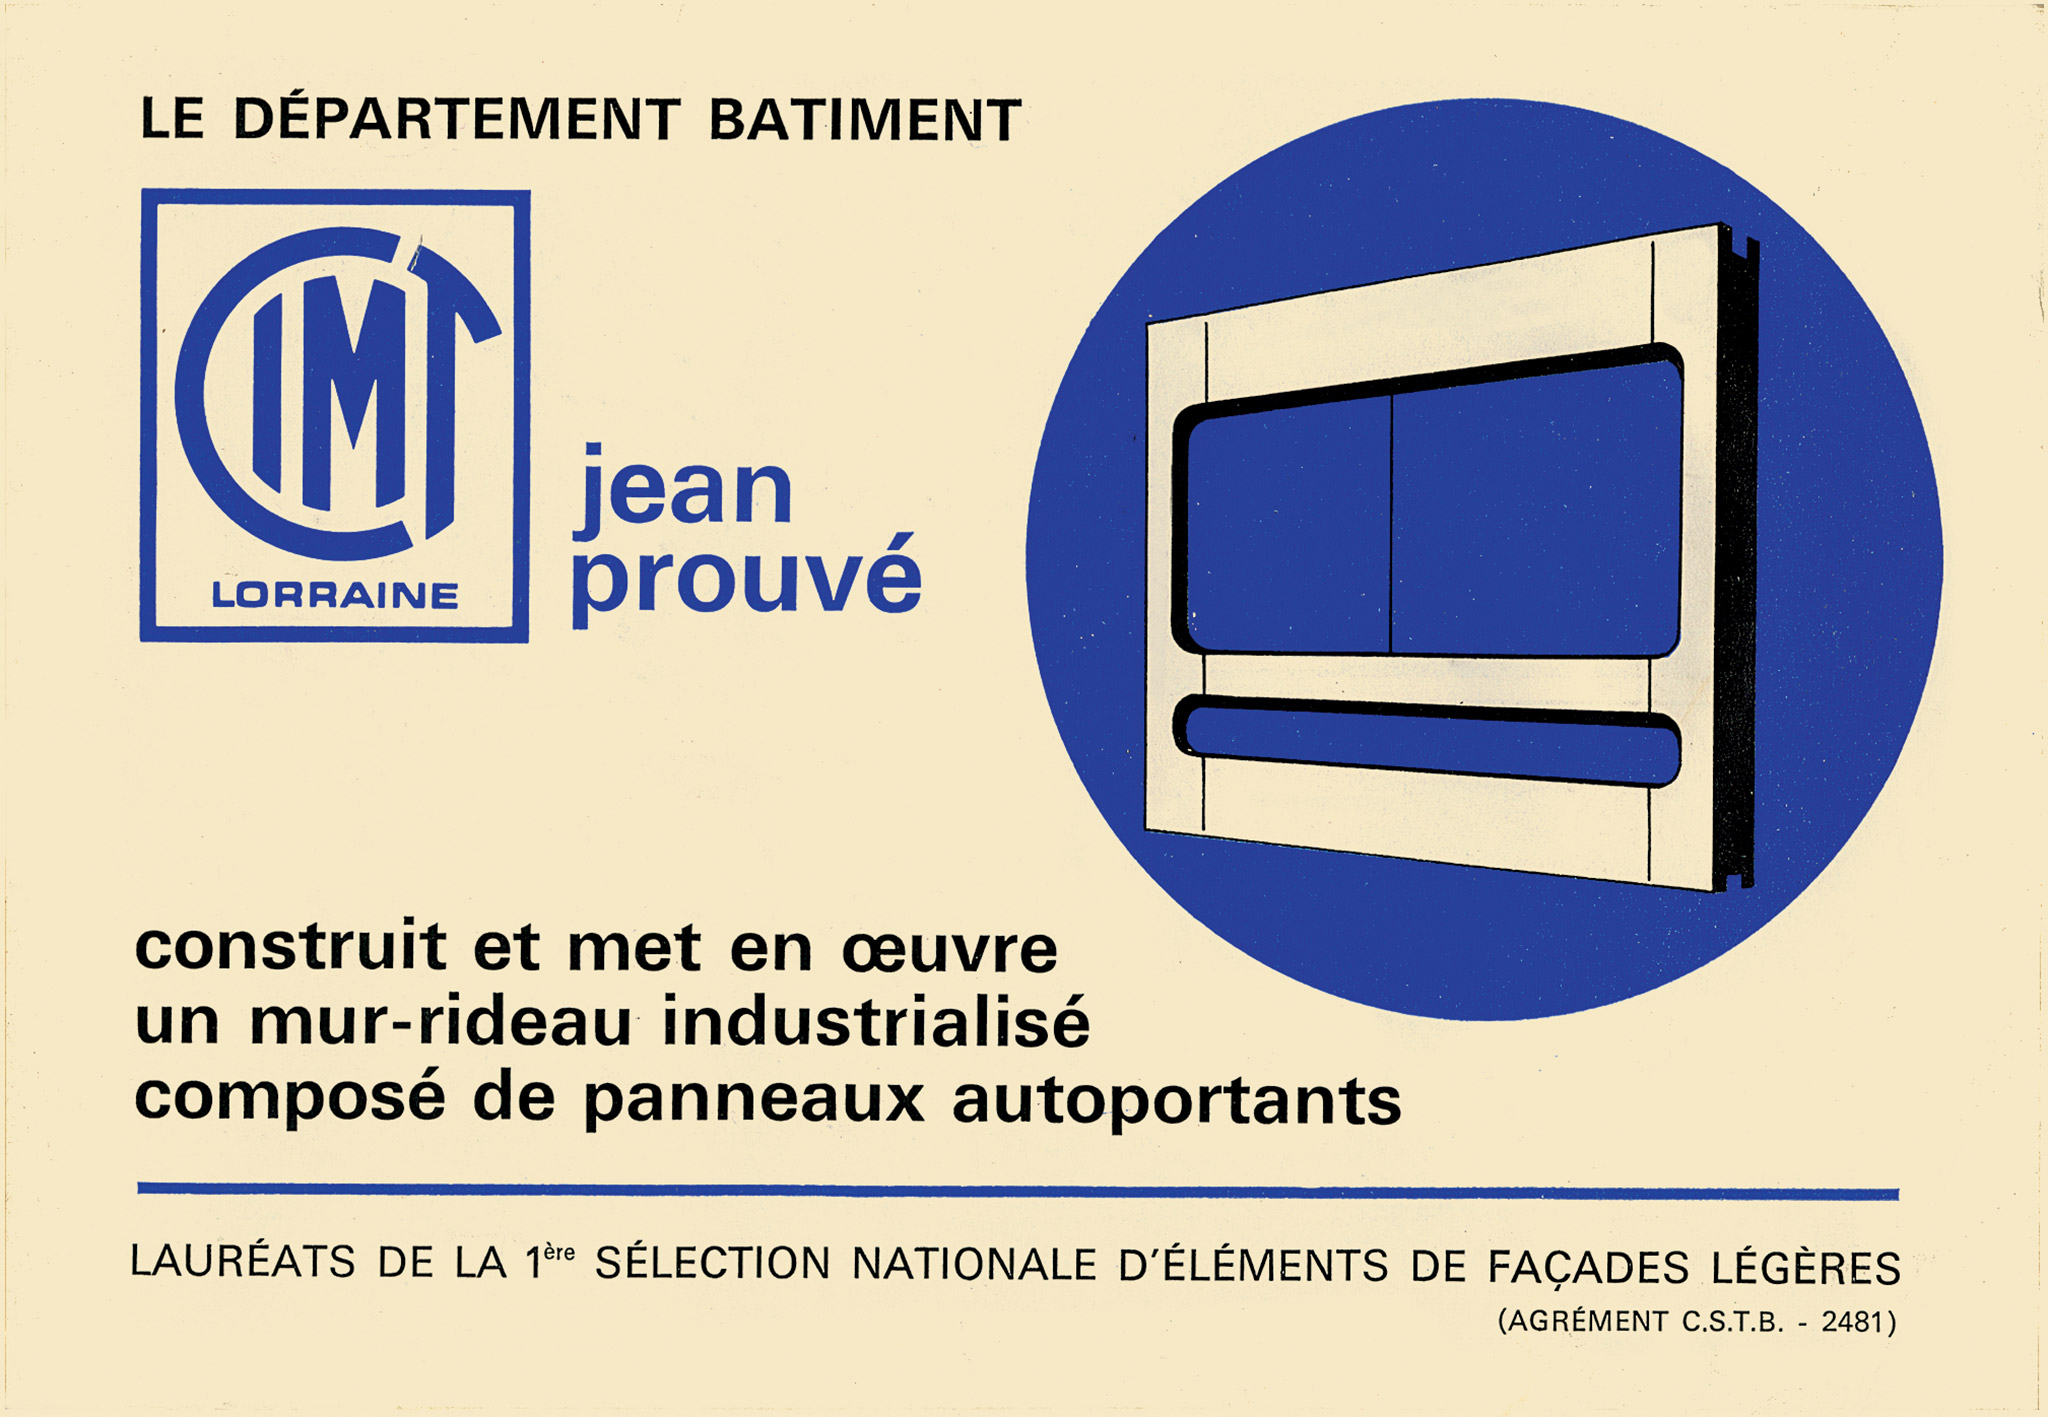 Advertisement for the CIMT–Jean Prouvé Lorraine mass-produced curtain wall, ca. 1964.